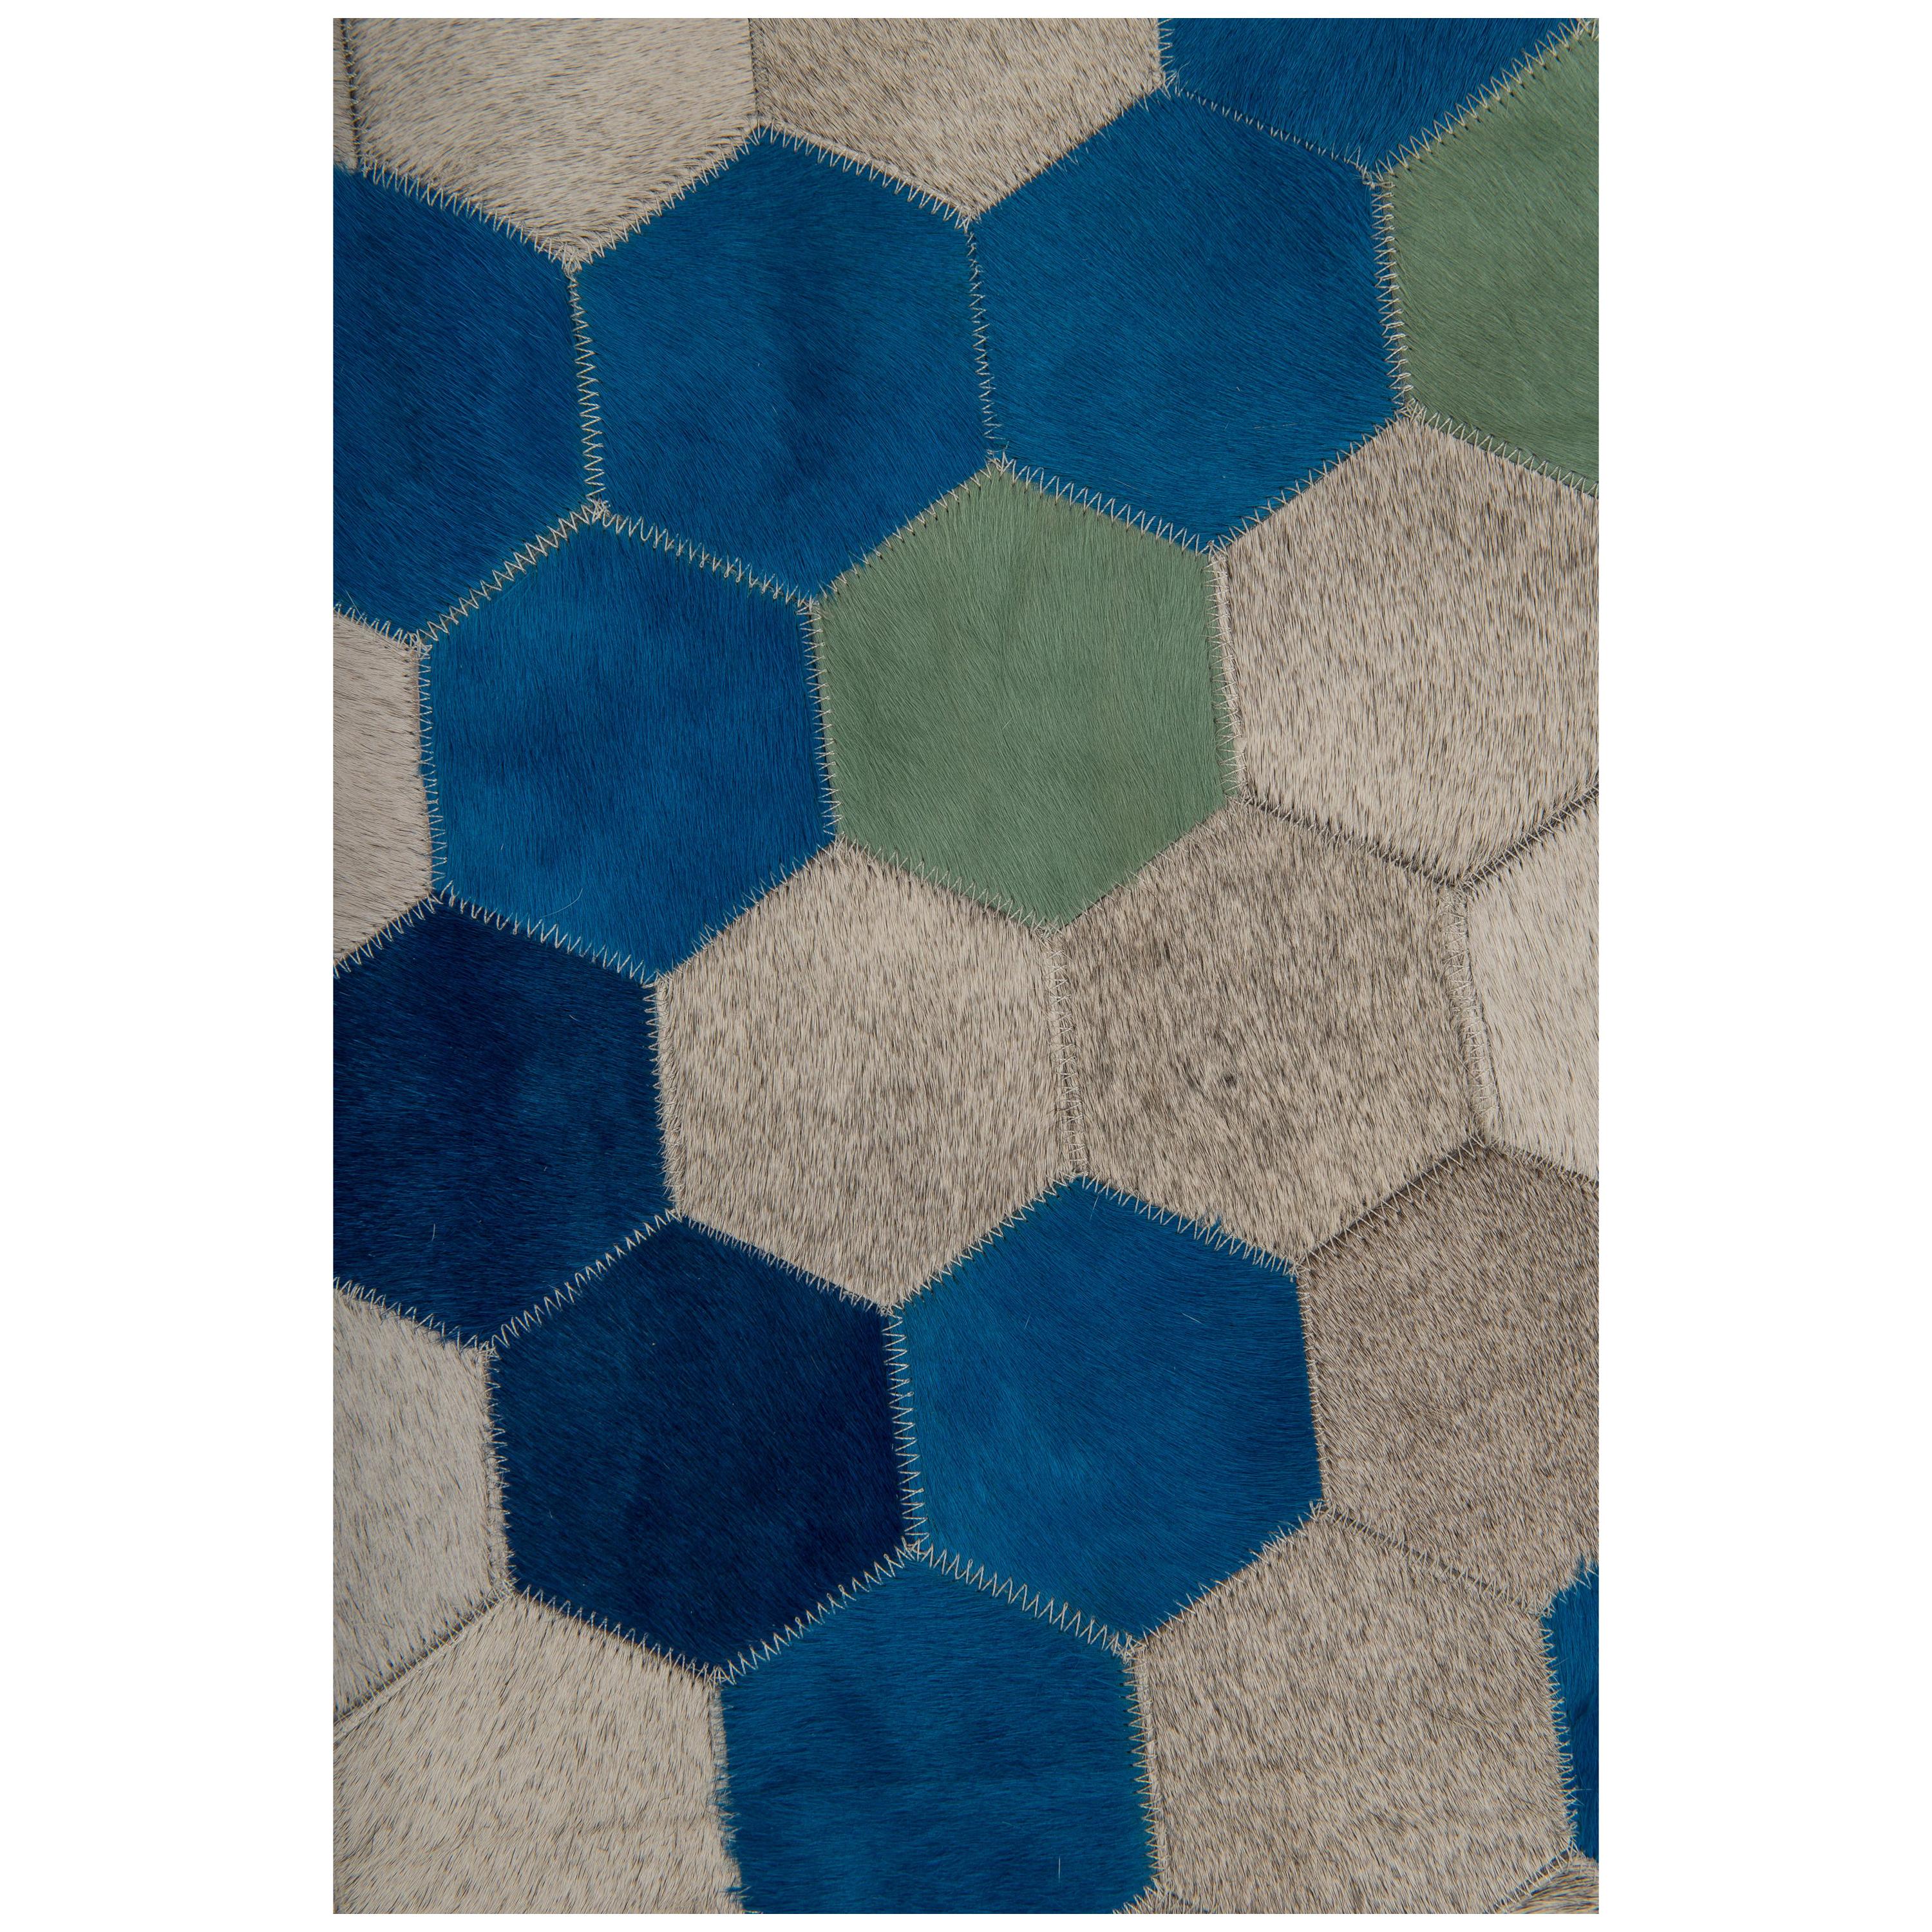 There’s no regrets from a long line of happy Art Hide customers who’ve made this stunning rug pride of place at home! Your future interior will be beautifully grounded with soft tones of luxurious cowhide, each varying slightly to form a natural